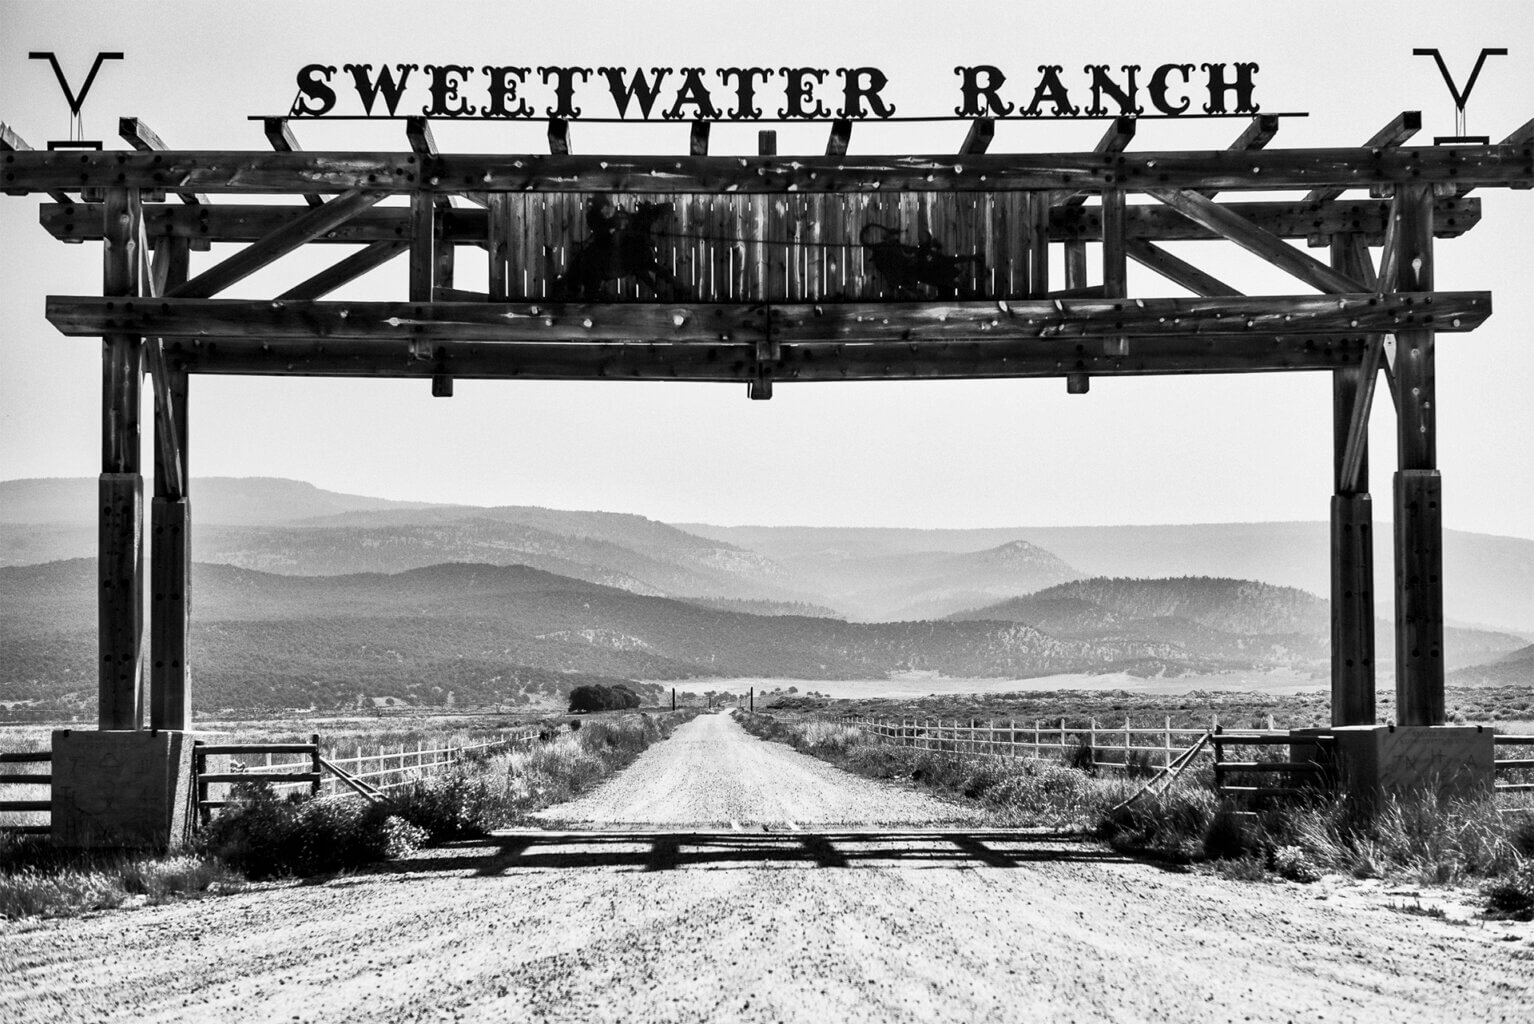 Black and white photo of the entrance and sign to Sweetwater Ranch, over a road leading to a wide, low mountain vista in the distance.